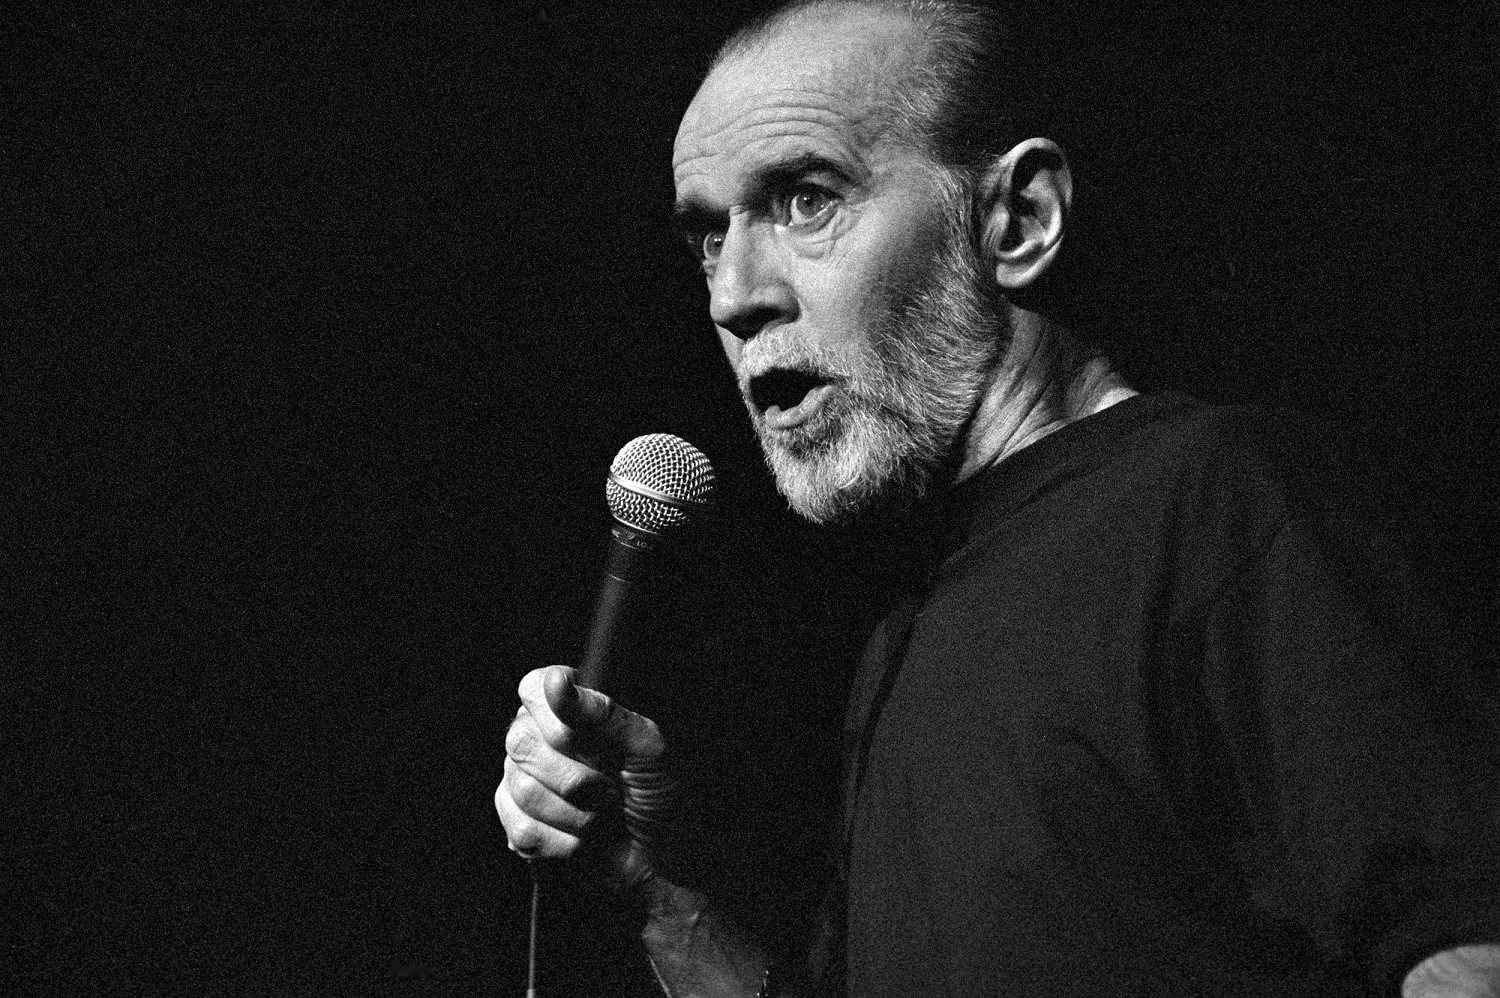 George Carlin's estate sues over AI-generated stand-up special titled 'I'm glad I'm dead'